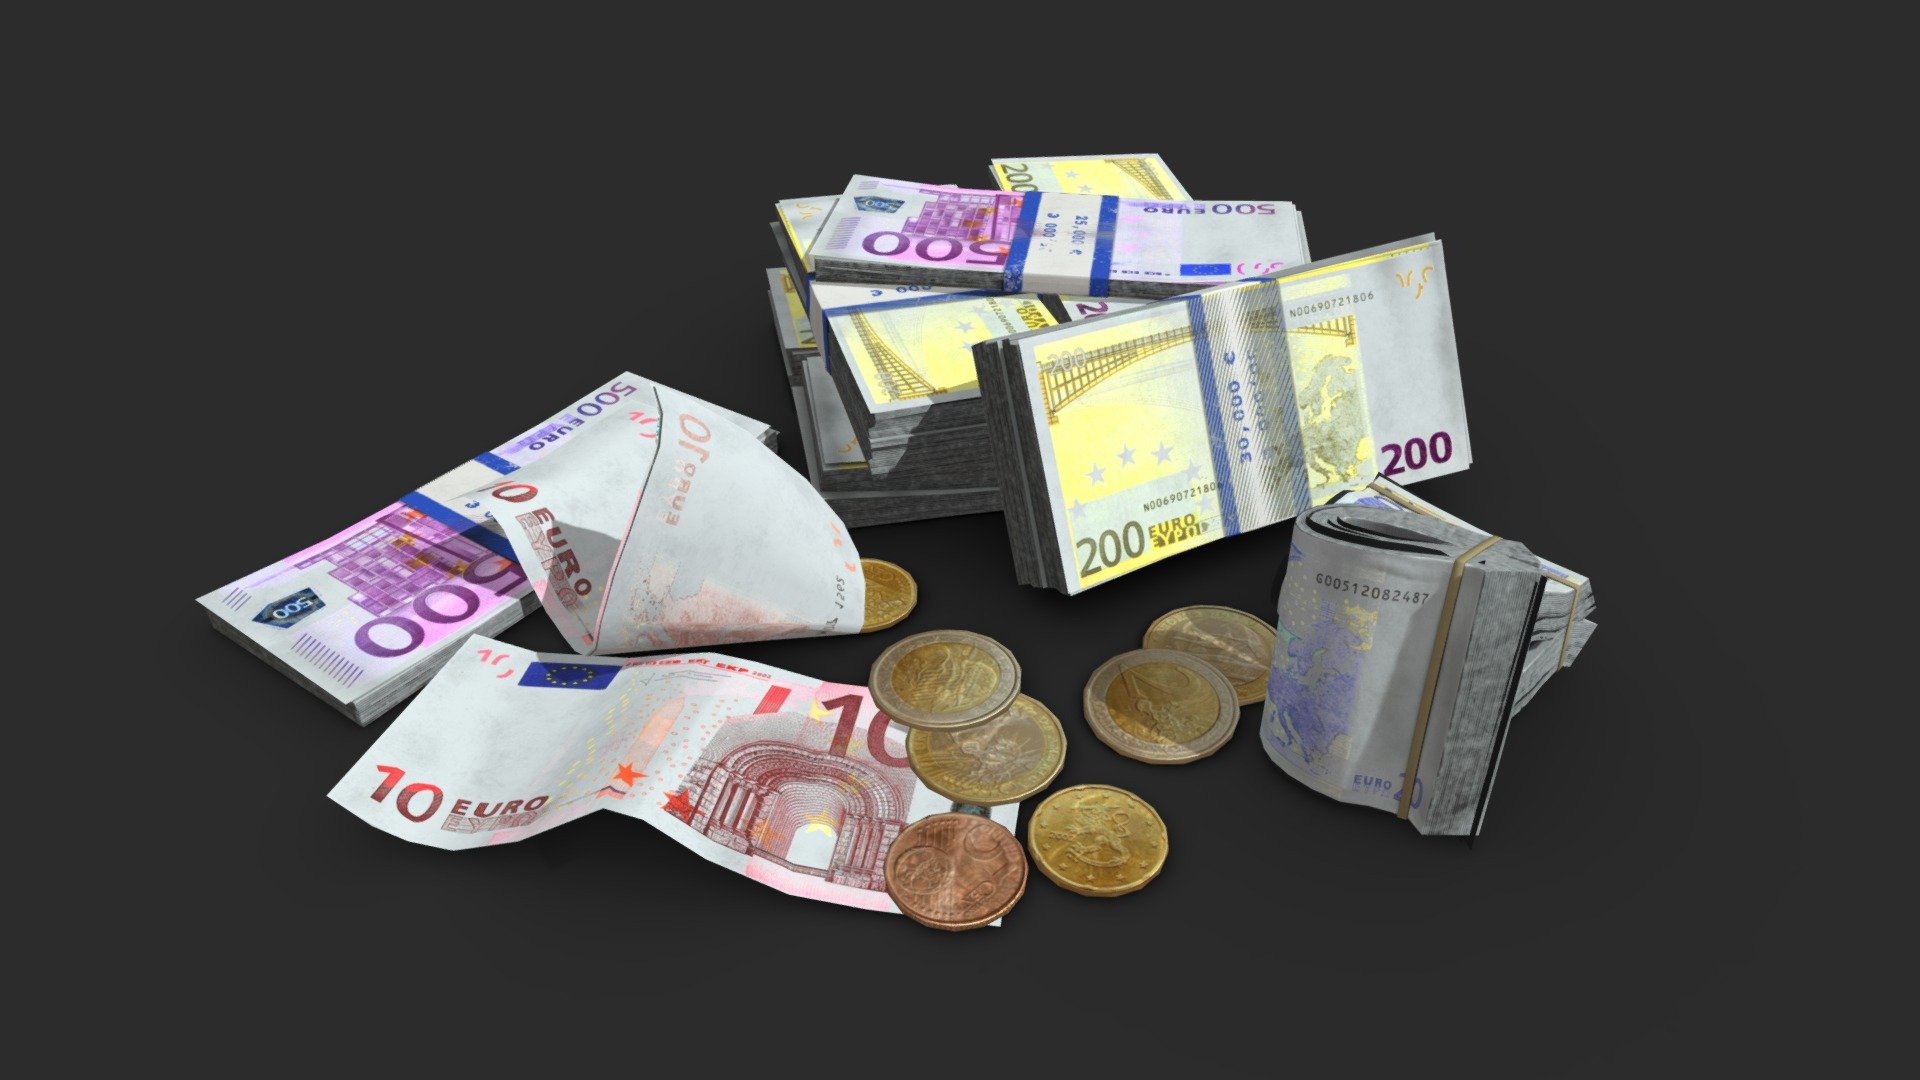 This european Euro money loots including banknotes and coins includes 22 objects :


10 individuals banknotes (in 2 values)
4 different coins
3 banknote stacks

The assets can be used in any game (post-apocaliptic, first or third person, GTA like, survival… ). All objects share a unique material for the best optimization for games.

Those AAA game assets pack of money loots will embellish your scene and add more details which can help the gameplay, the game design or the level design.

All textures are PBR ready and available in 4K.

Low-poly model &amp; Blender native 3.1

SPECIFICATIONS


Objects : 22
Polygons : 4541

GAME SPECS


LODs : Yes (inside FBX for Unity &amp; Unreal)
Numbers of LODs : 2
Collider : No

EXPORTED FORMATS


FBX
Collada
OBJ

TEXTURES


Materials in scene : 1
Textures sizes : 4K
Textures types : Base Color, Metallic, Roughness, Normal (DirectX &amp; OpenGL), Heigh &amp; AO (also Unity &amp; Unreal ARM workflow maps)
Textures format : PNG
 - Money Loot - Euro - Buy Royalty Free 3D model by KangaroOz 3D (@KangaroOz-3D) 3d model